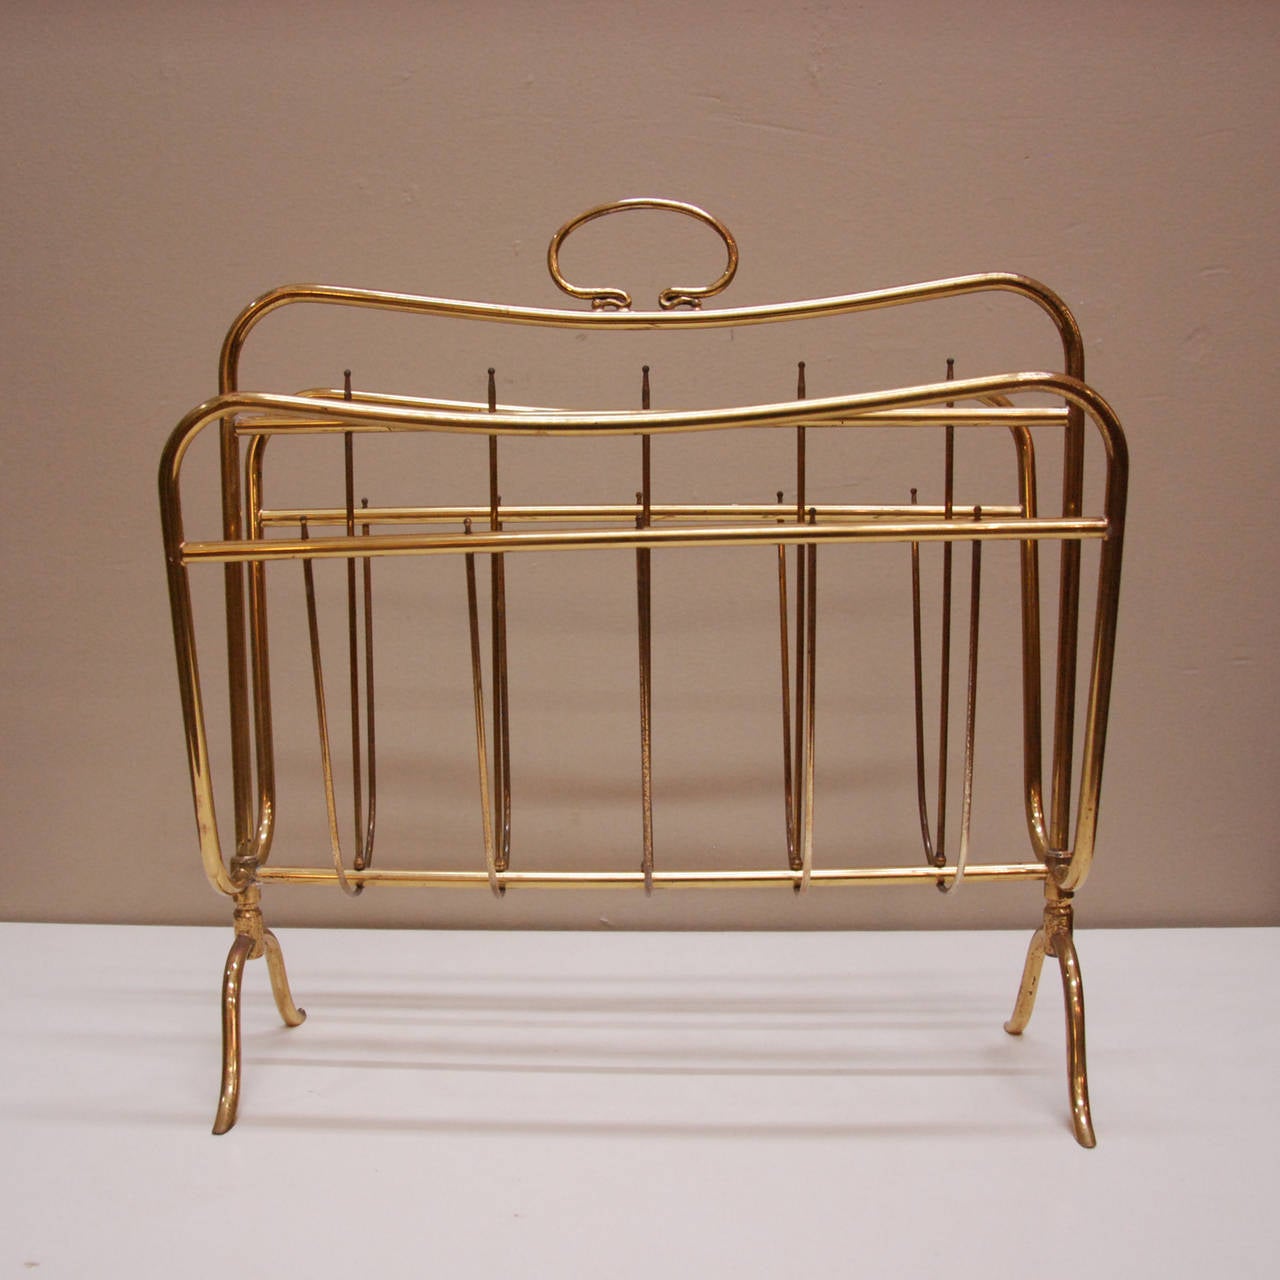 A very stylish biomorphic brass magazine holder attributed to the manufacturer Maffeis that is so representative of its era.